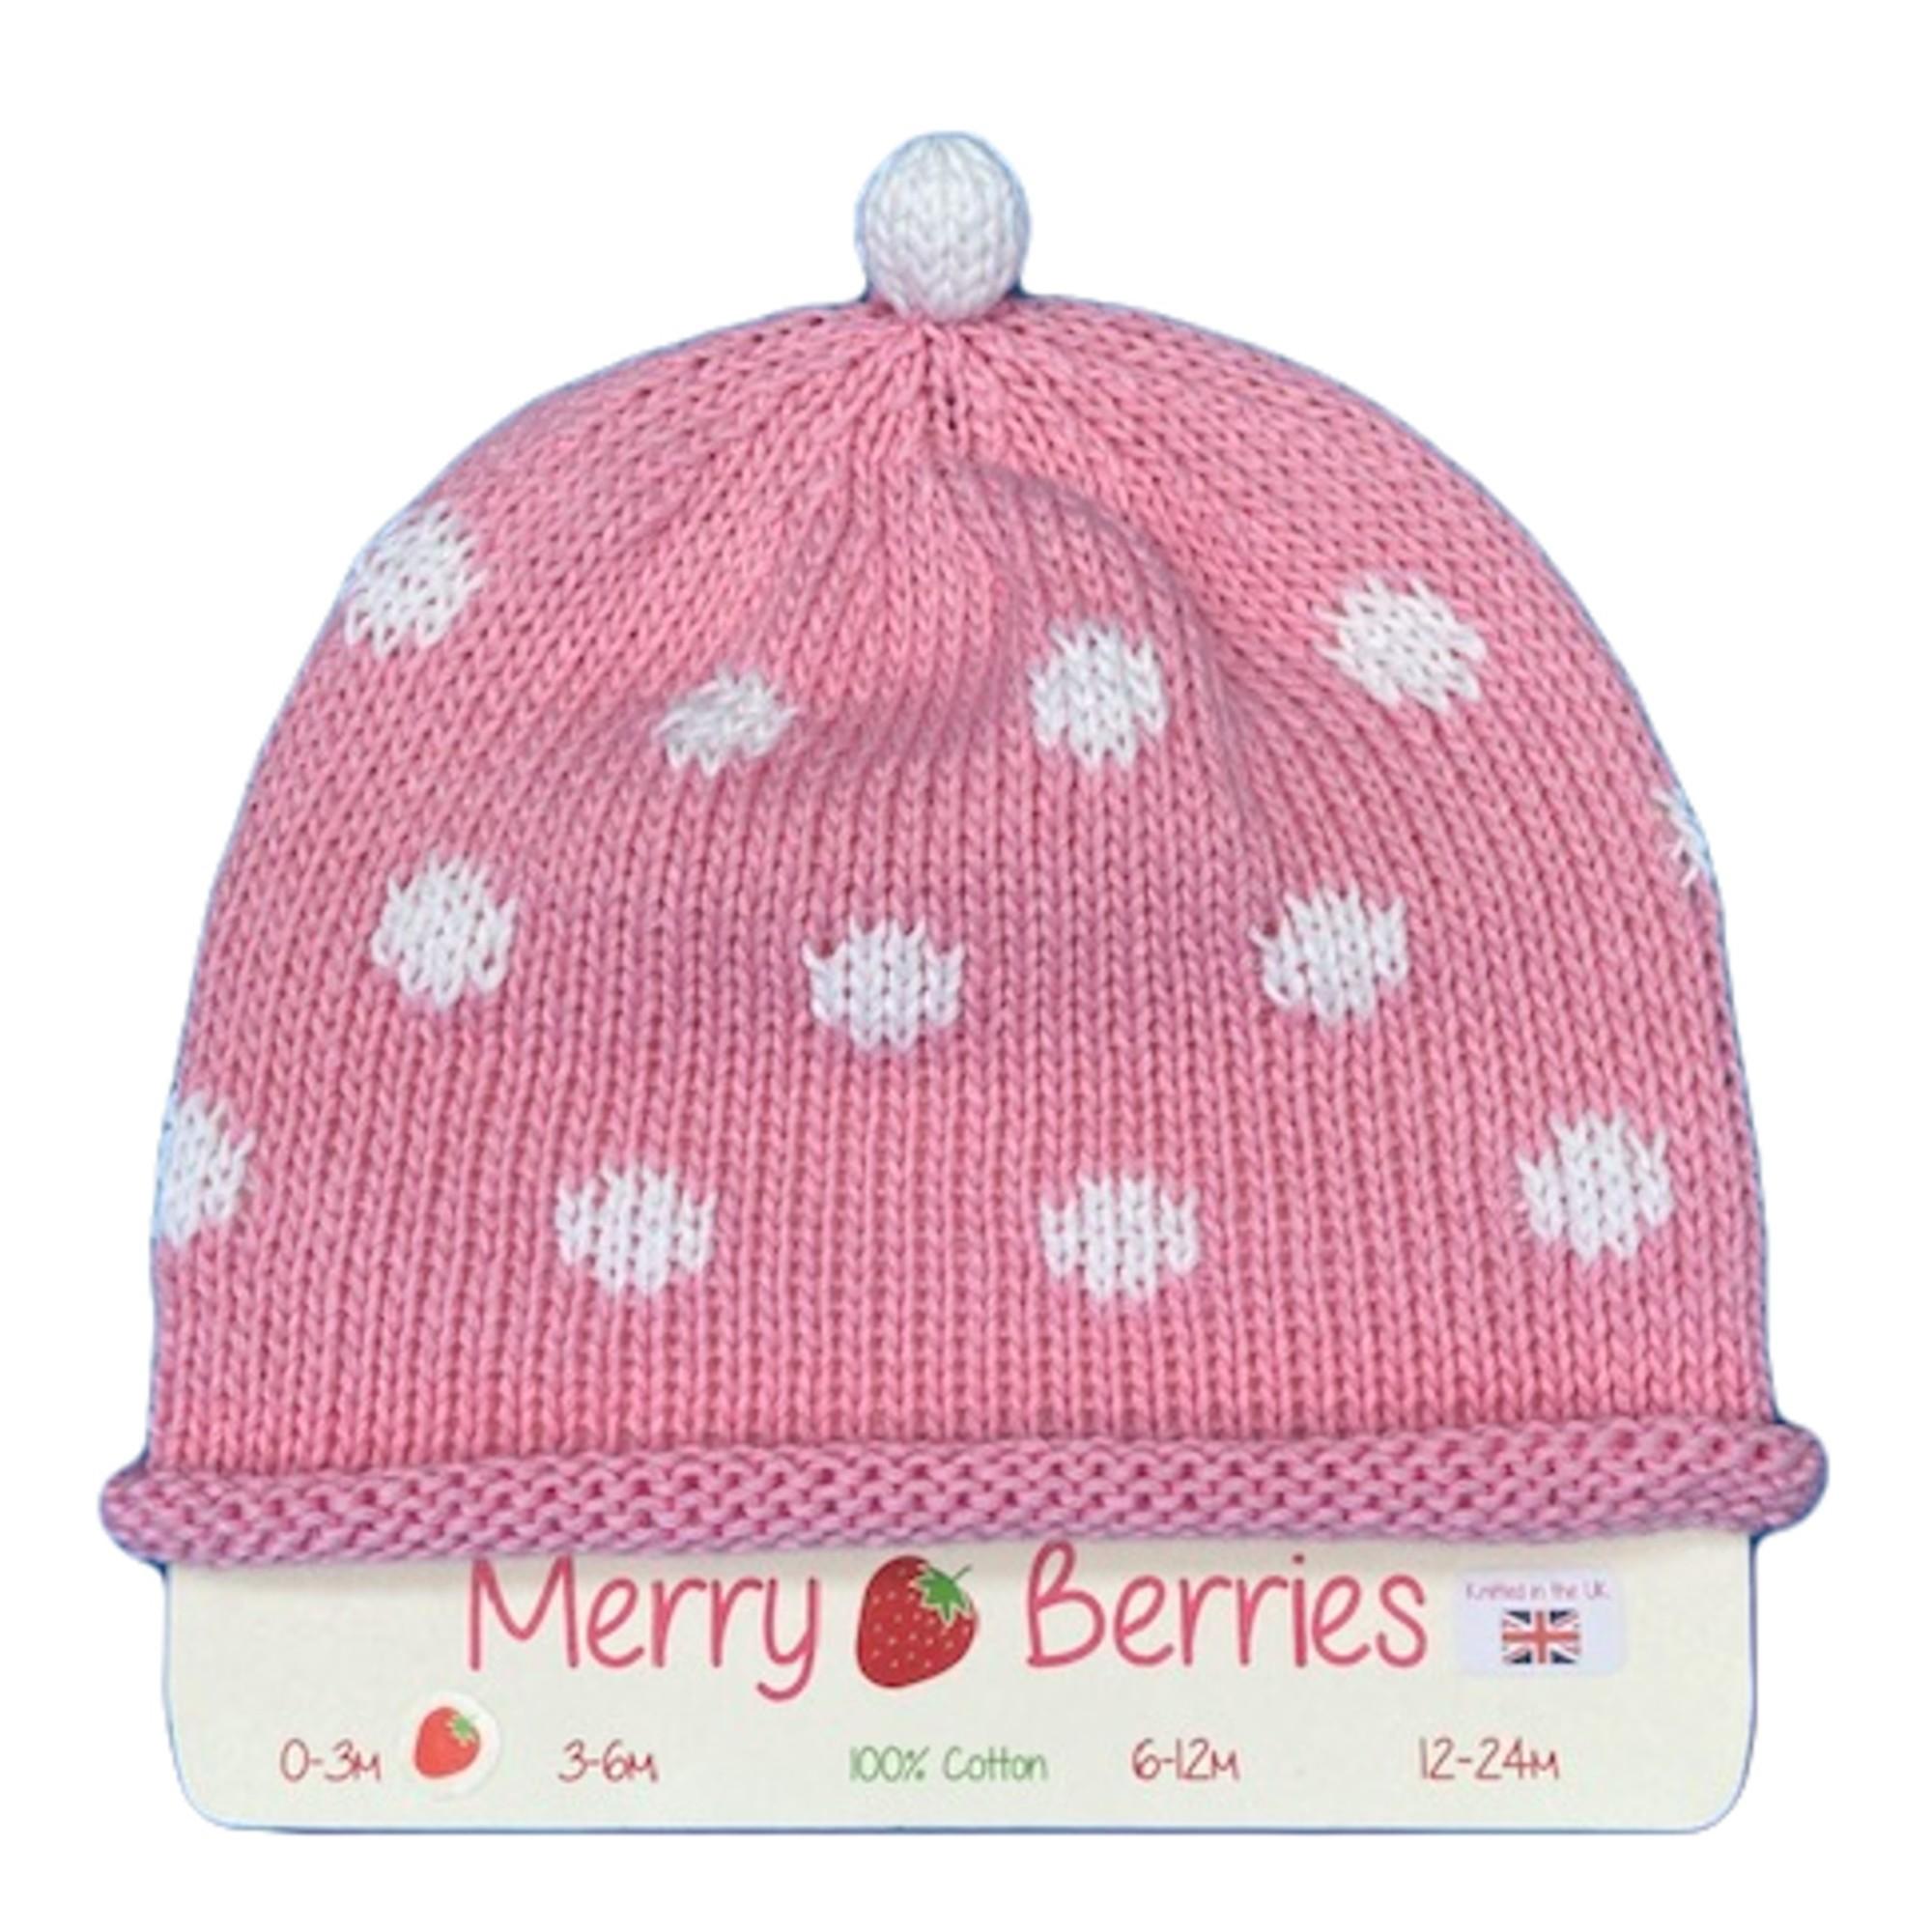 Merry Berries - Pink white spot Knitted baby Hat-0-24mths-Cotton